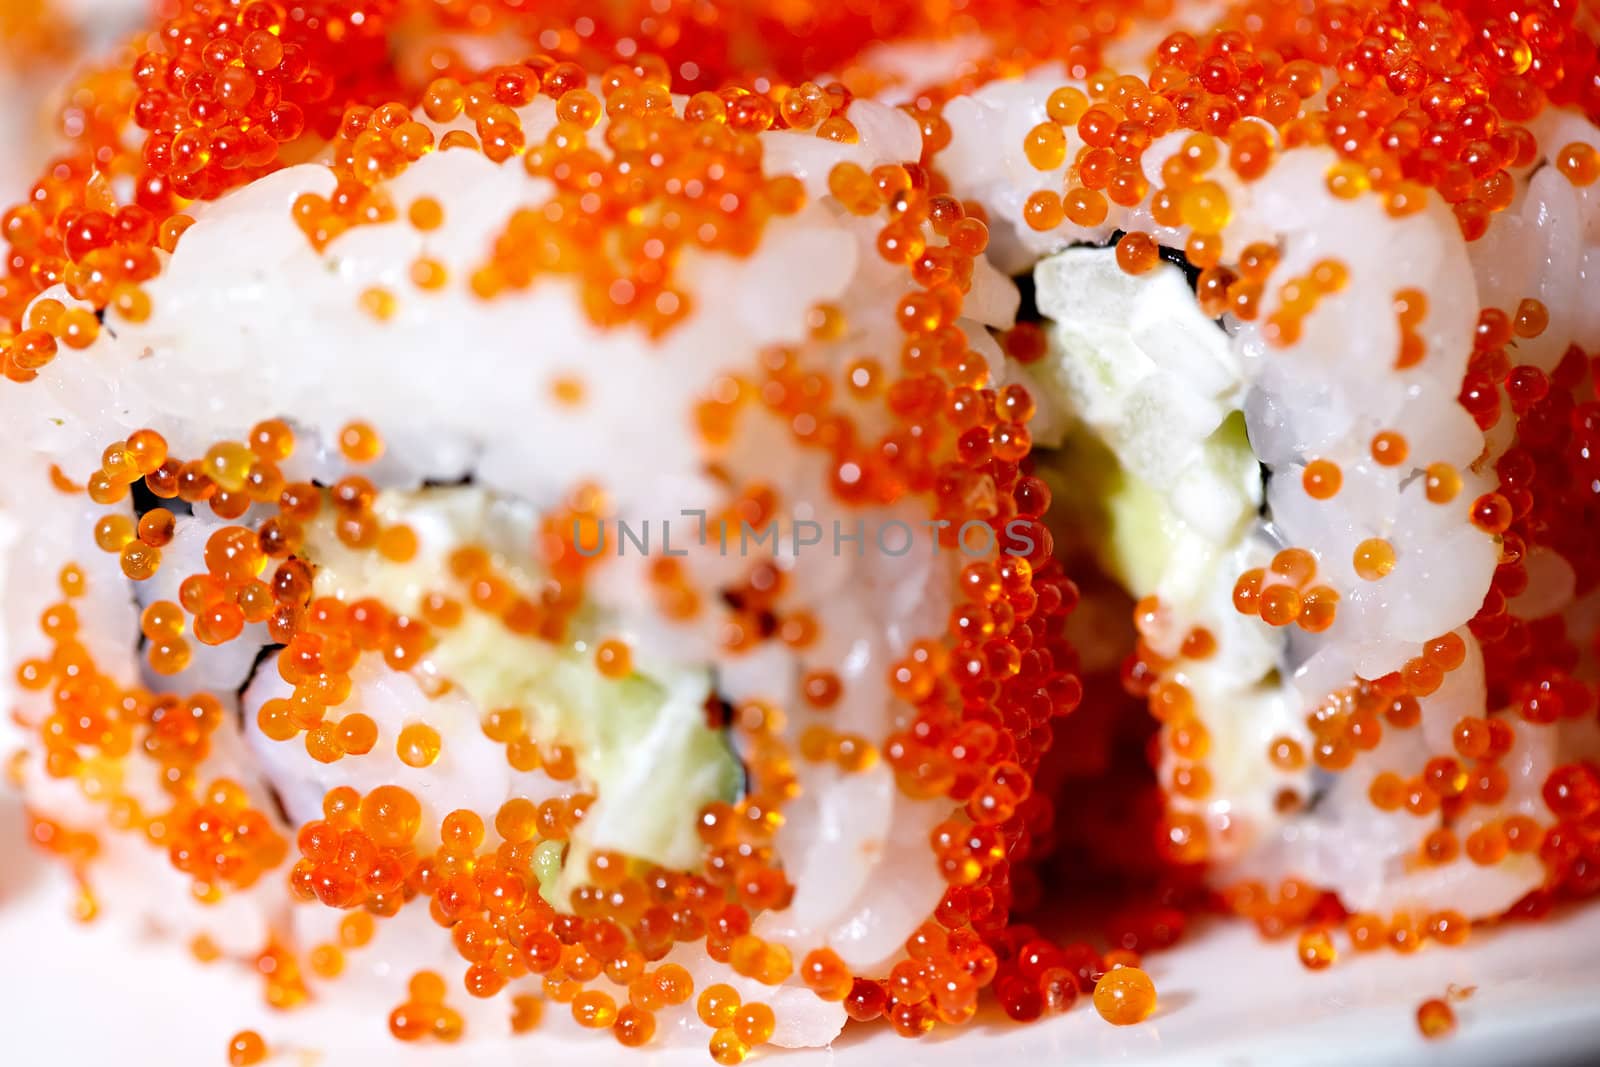 Macro shot of the California roll with red caviar. Shallow dof.